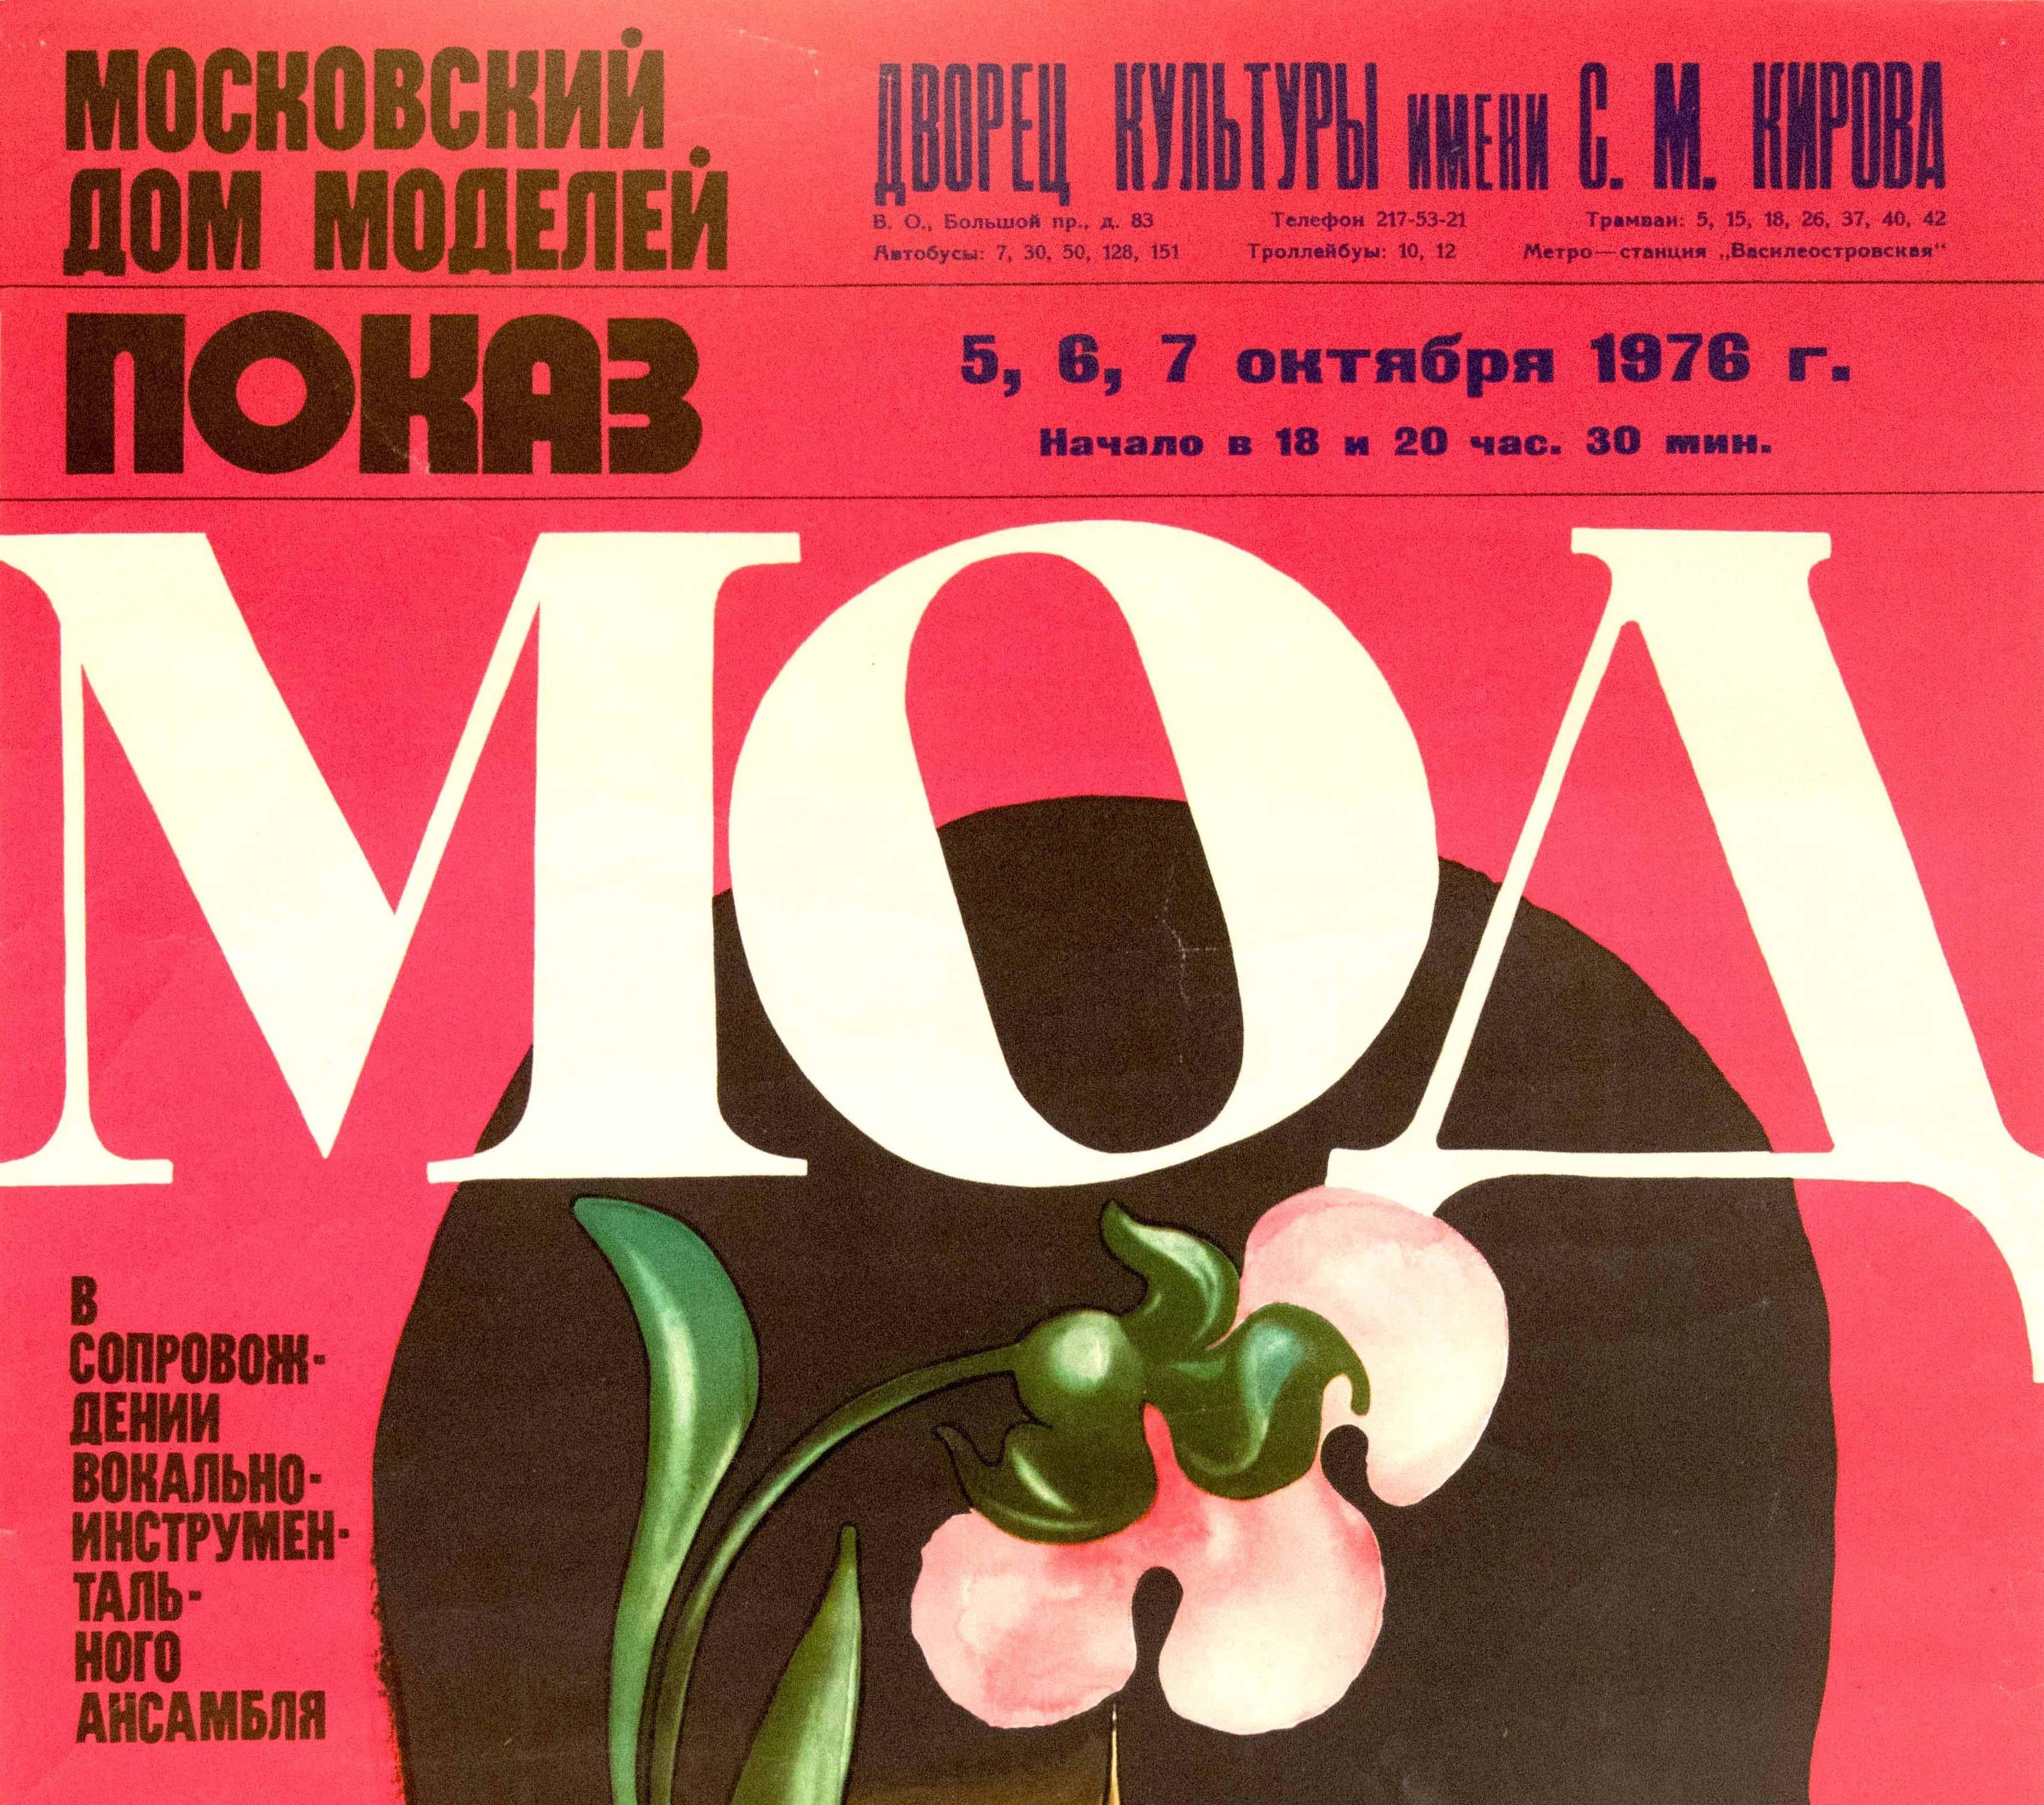 Original vintage Soviet advertising poster for a Fashion Show accompanied by a vocal instrumental music ensemble organised by the Moscow House of Models and held at Kirov Palace of Culture on 5-7 October 1976 featuring an illustration of a lady with